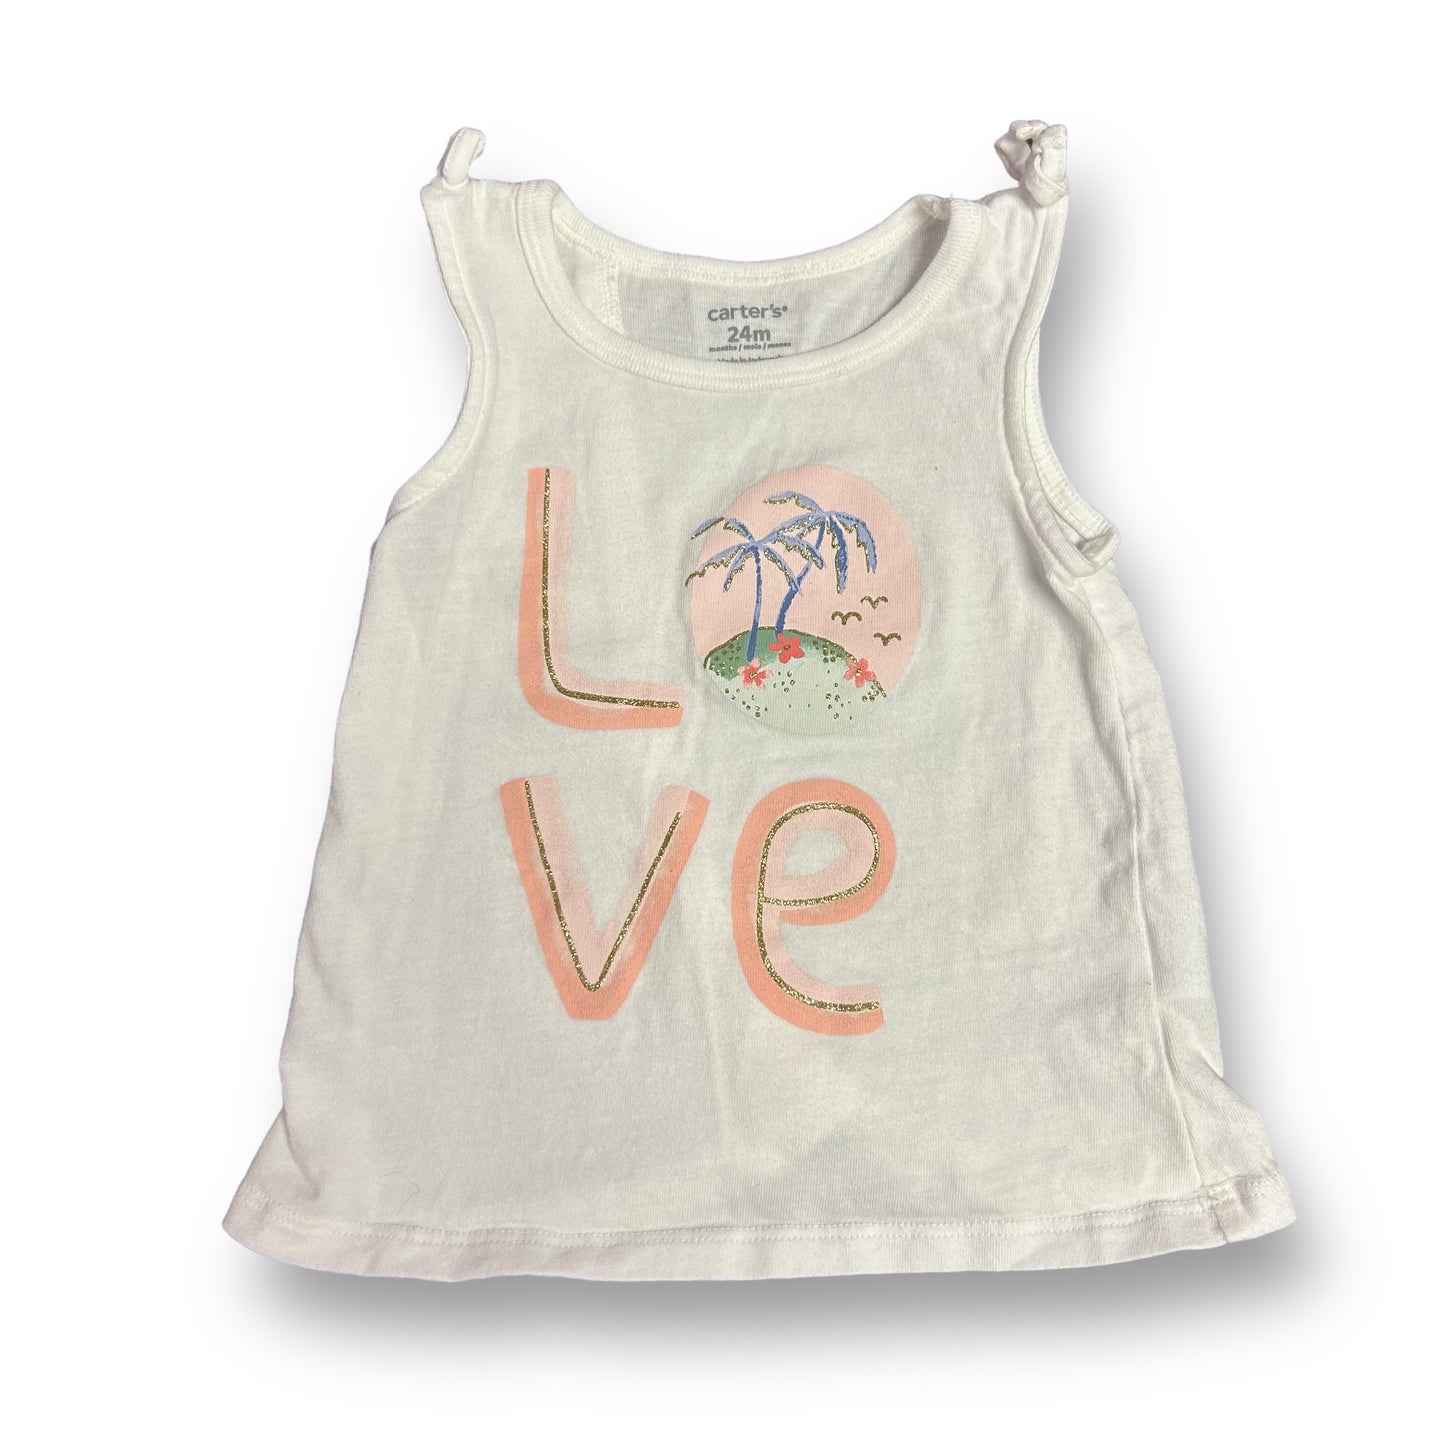 Girls Carter's Size 24 Months White Tropical Print Tank Top